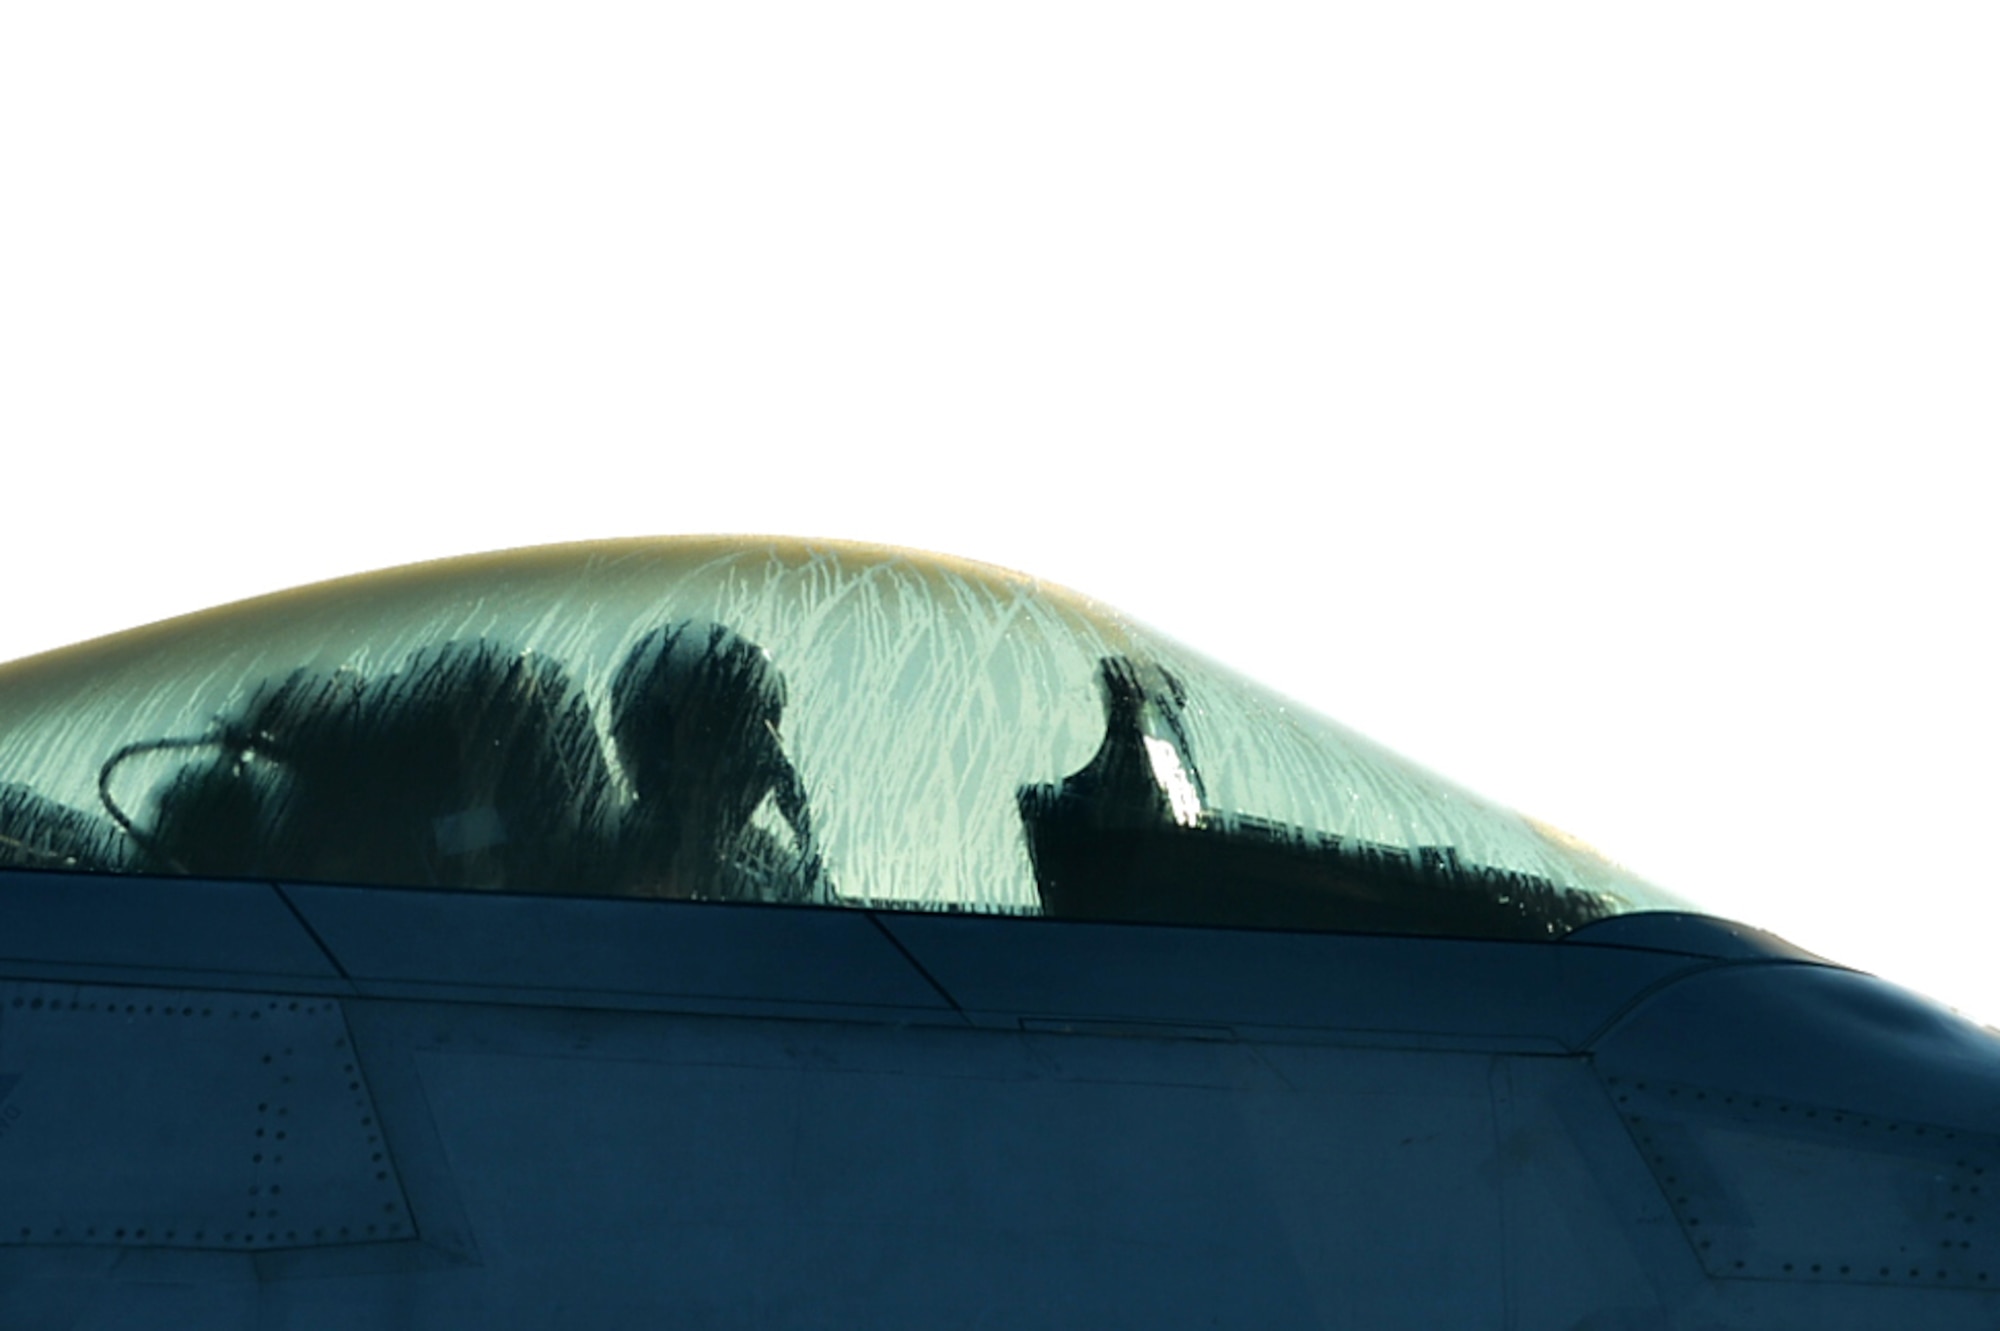 A U.S. Air Force pilot assigned to Tyndall Air Force Base (AFB), Fla., taxis his F-22 Raptor during basic fighter maneuver training at Shaw AFB, S.C., Dec. 1, 2017.